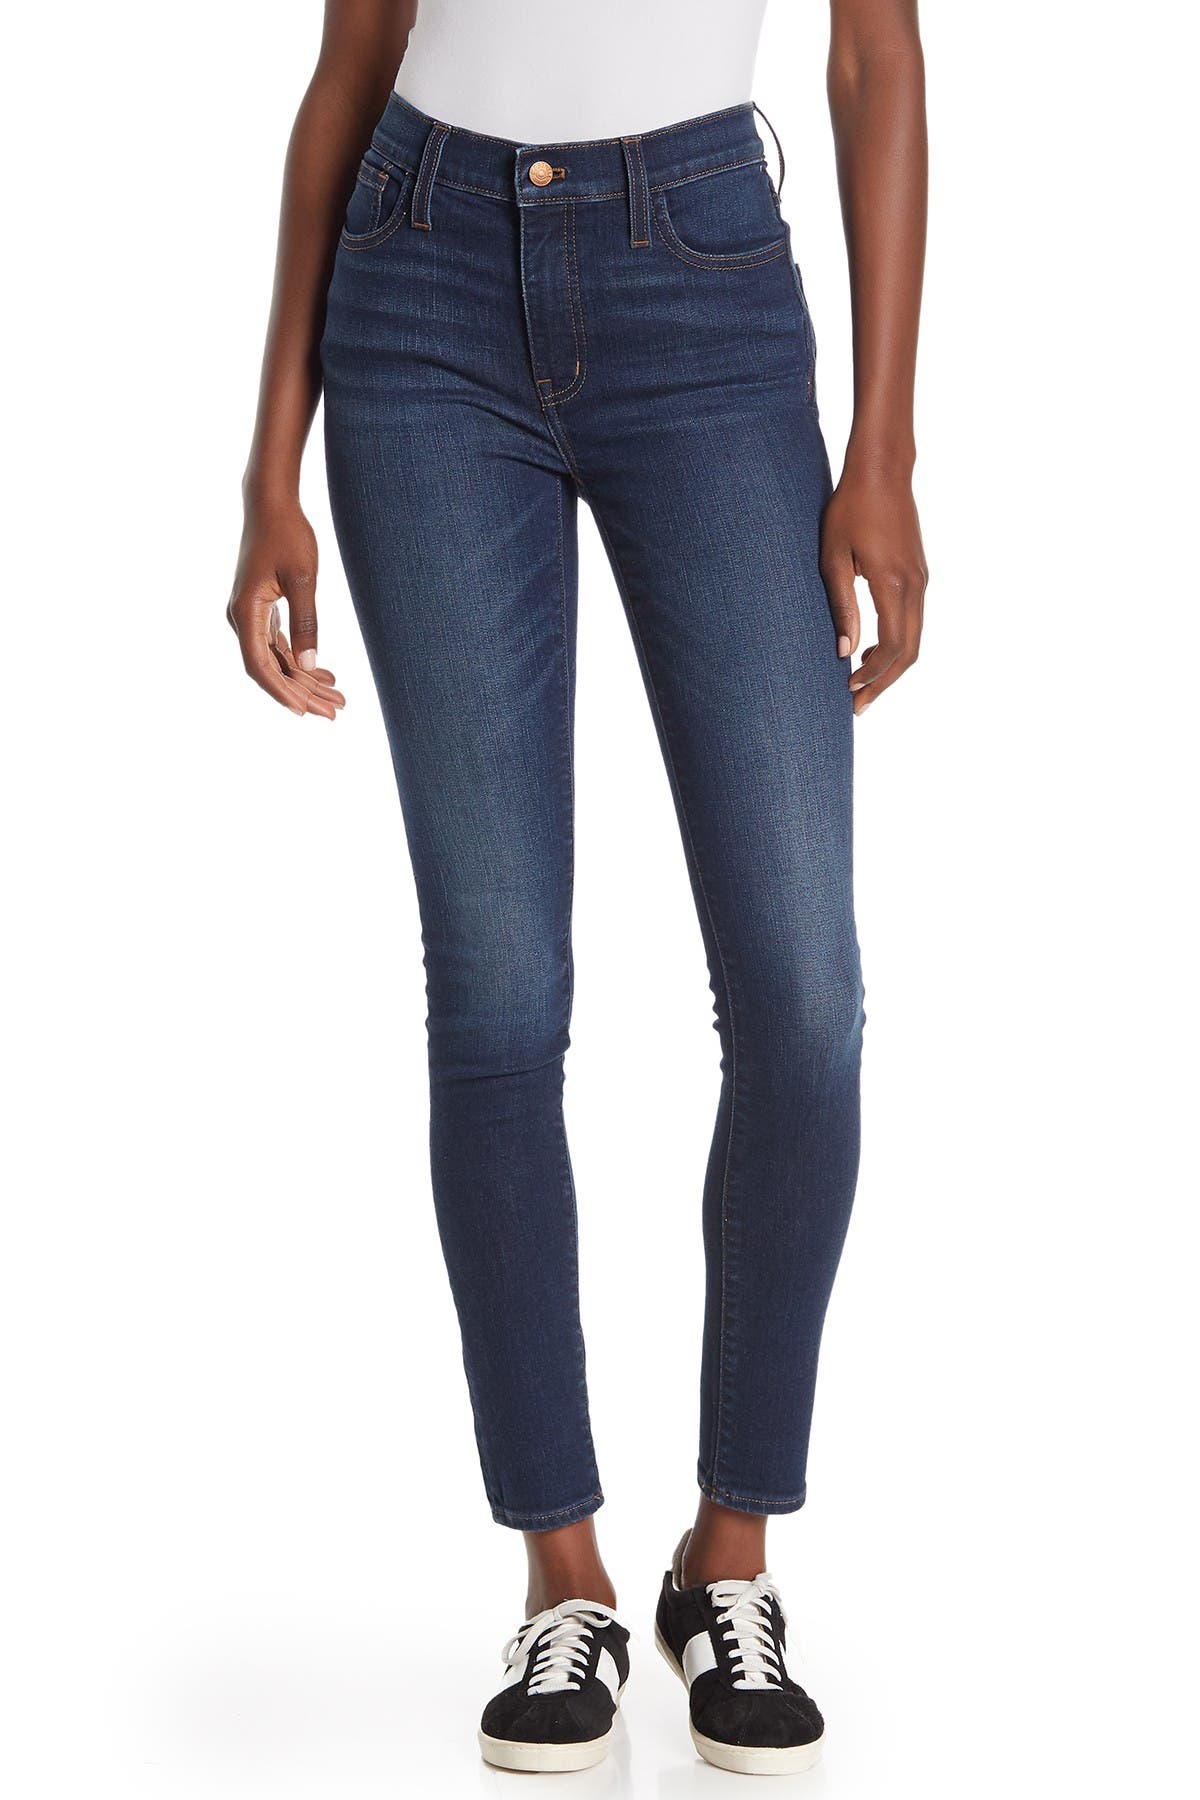 madewell womens jeans